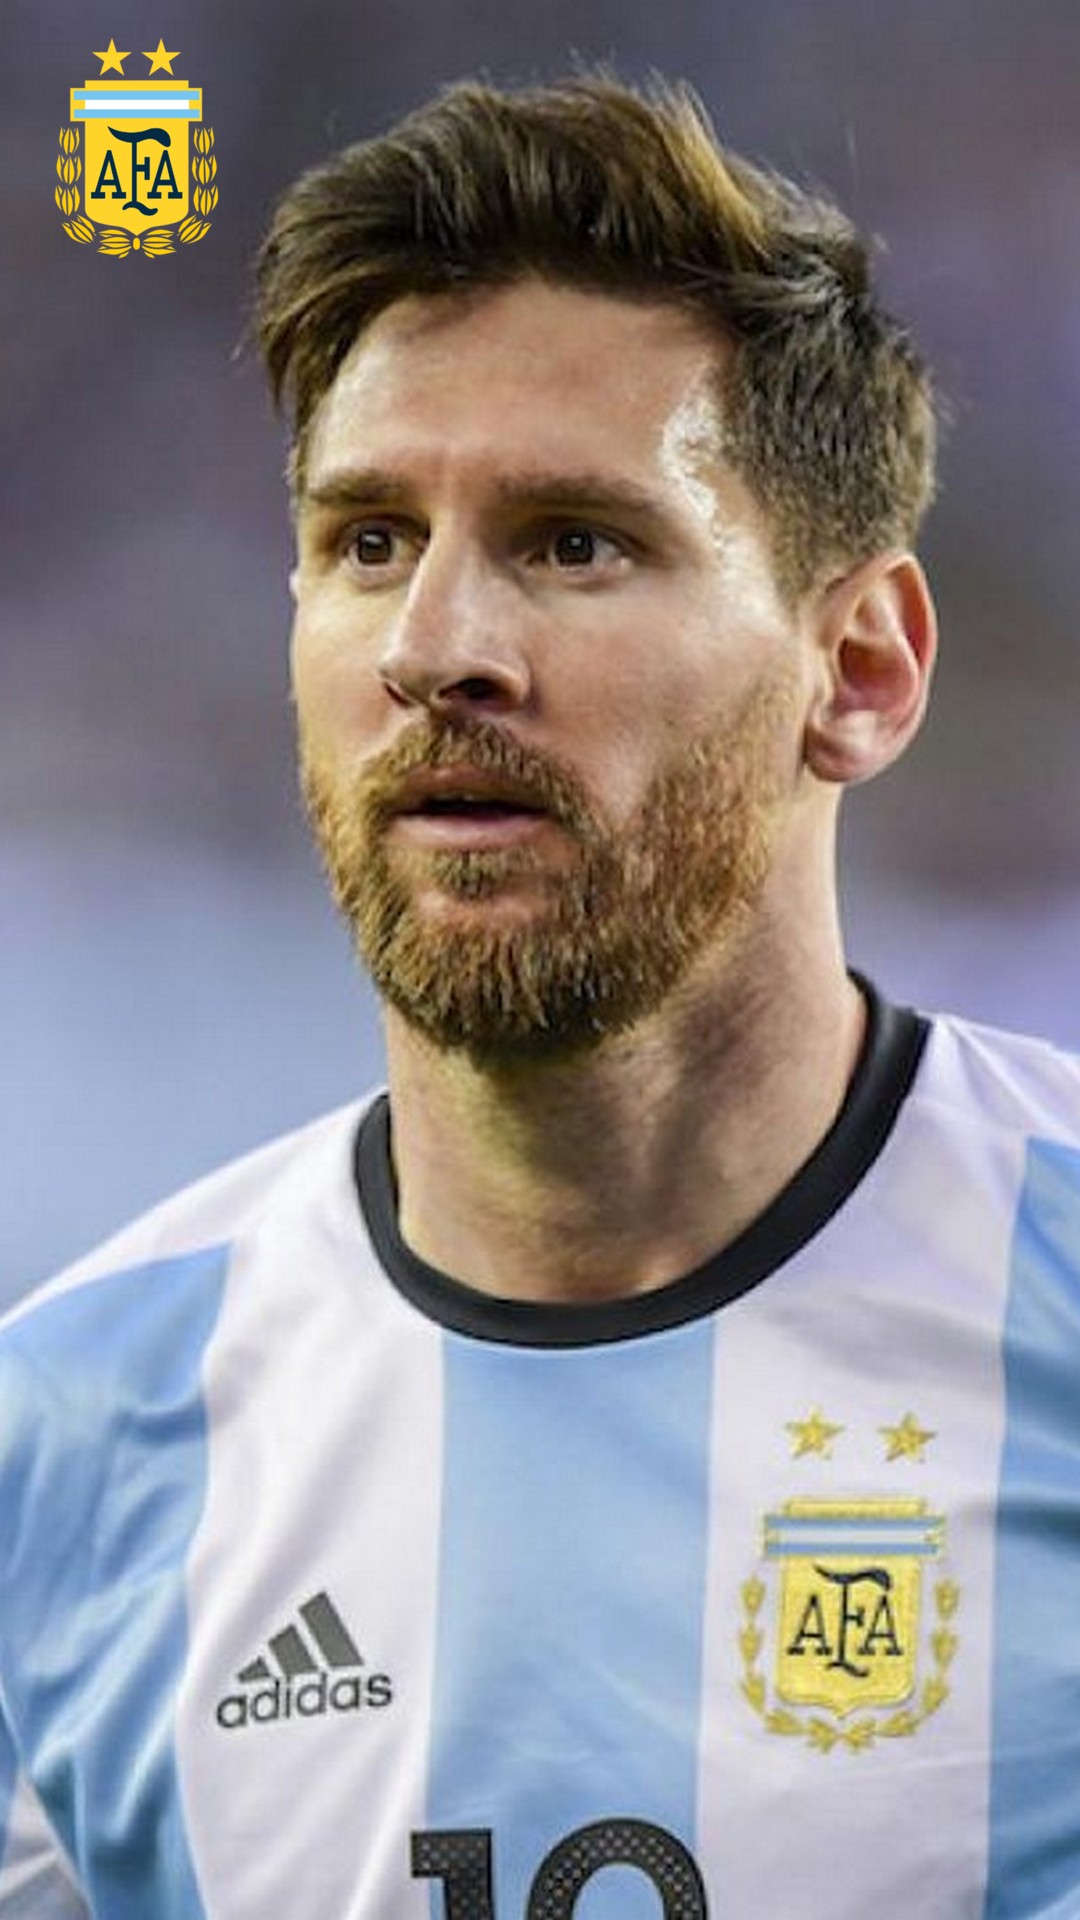 Wallpaper Messi Argentina iPhone with image resolution 1080x1920 pixel. You can make this wallpaper for your iPhone 5, 6, 7, 8, X backgrounds, Mobile Screensaver, or iPad Lock Screen